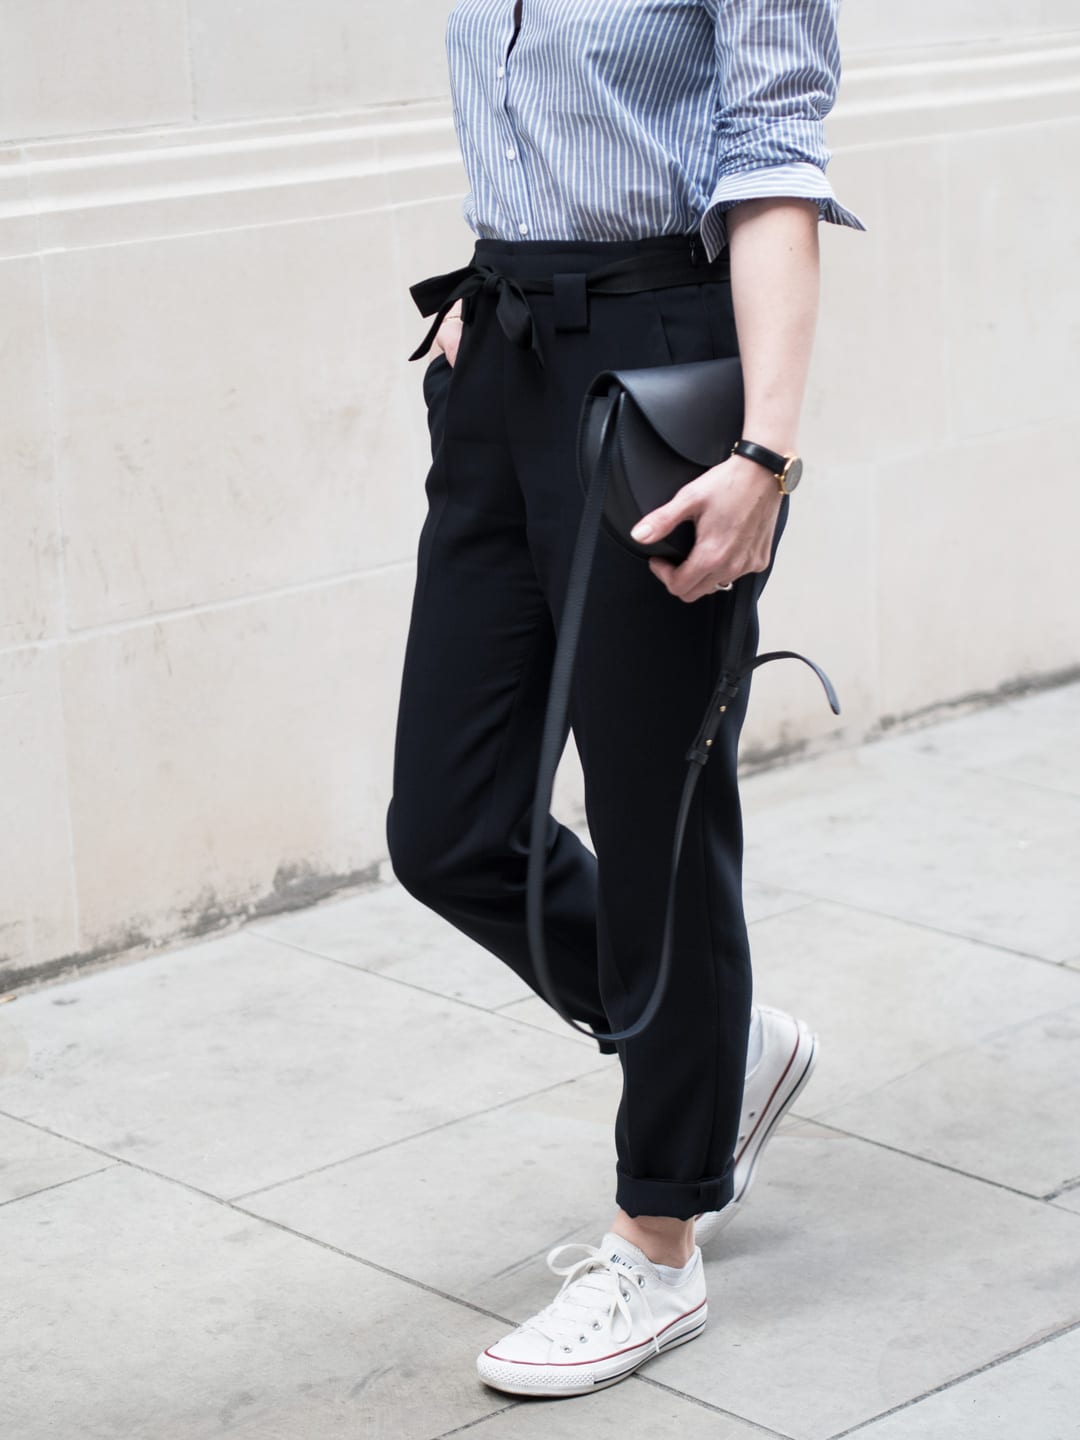 The Frill of It | Second Female Blue Frilled Blouse, Topshop MA-1 Navy Bomber Jacket, ME+EM Navy Trousers, Converse Chuck Taylors & PB 0110 Shoulder Bag